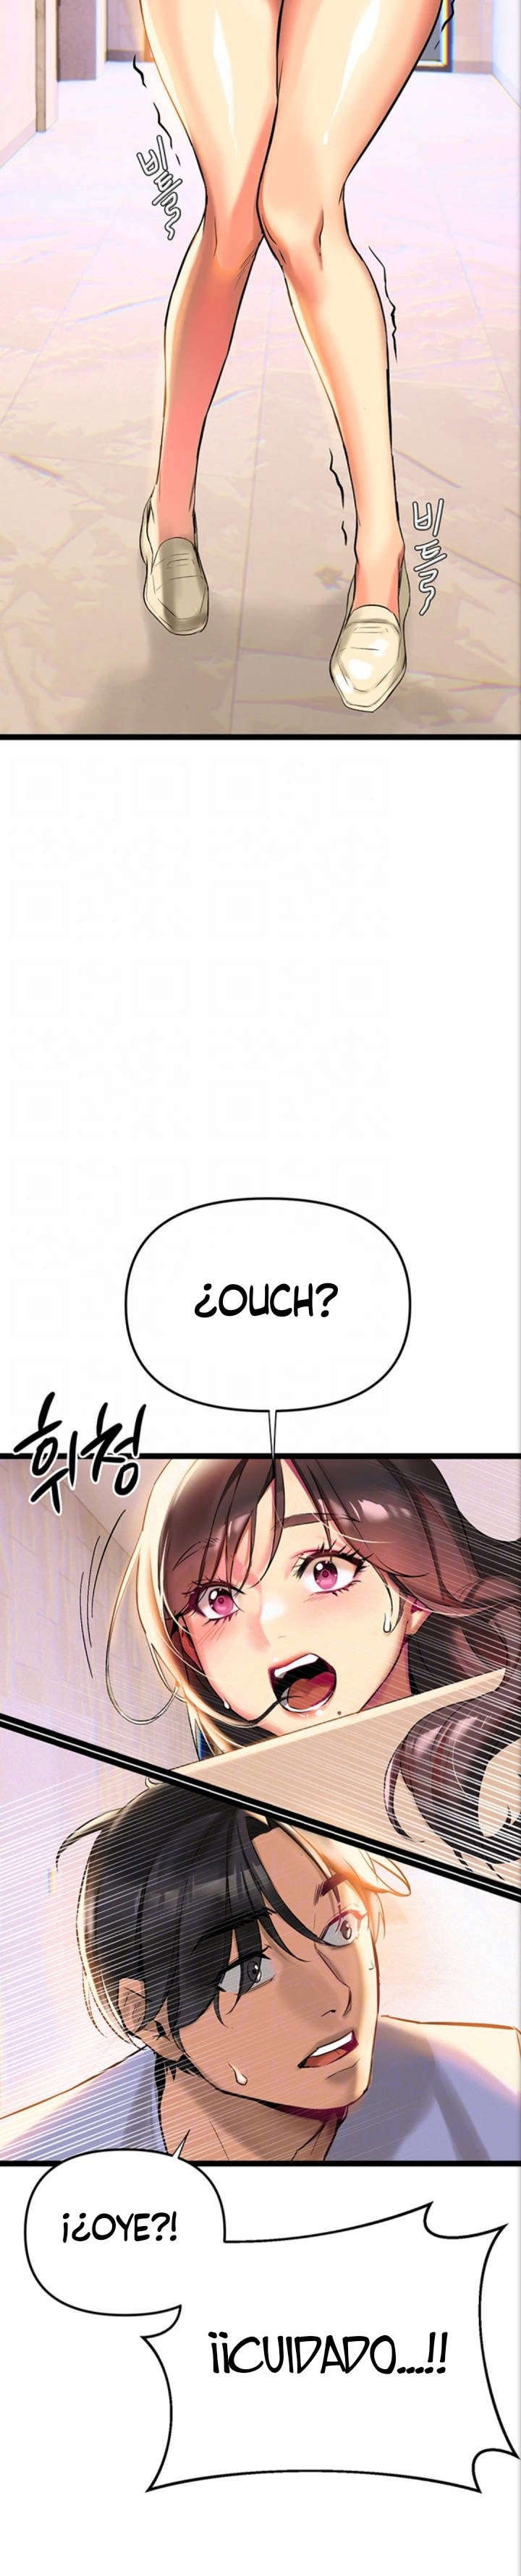 I Need You, Noona Raw - Chapter 2 Page 7